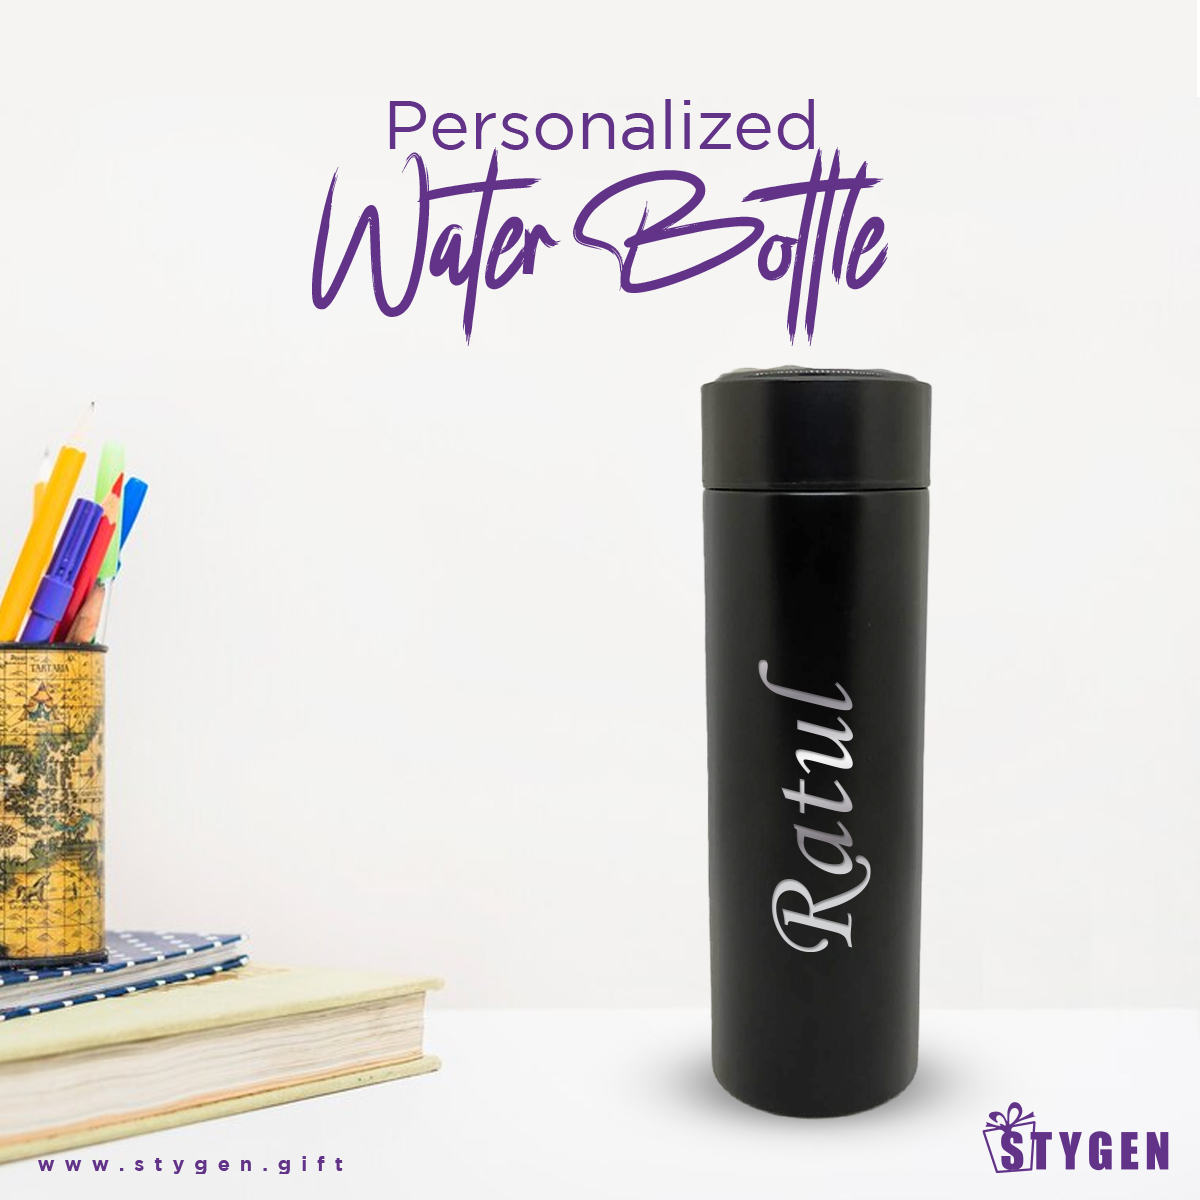 Personalized Thermos Water Bottle for your loved one (11)